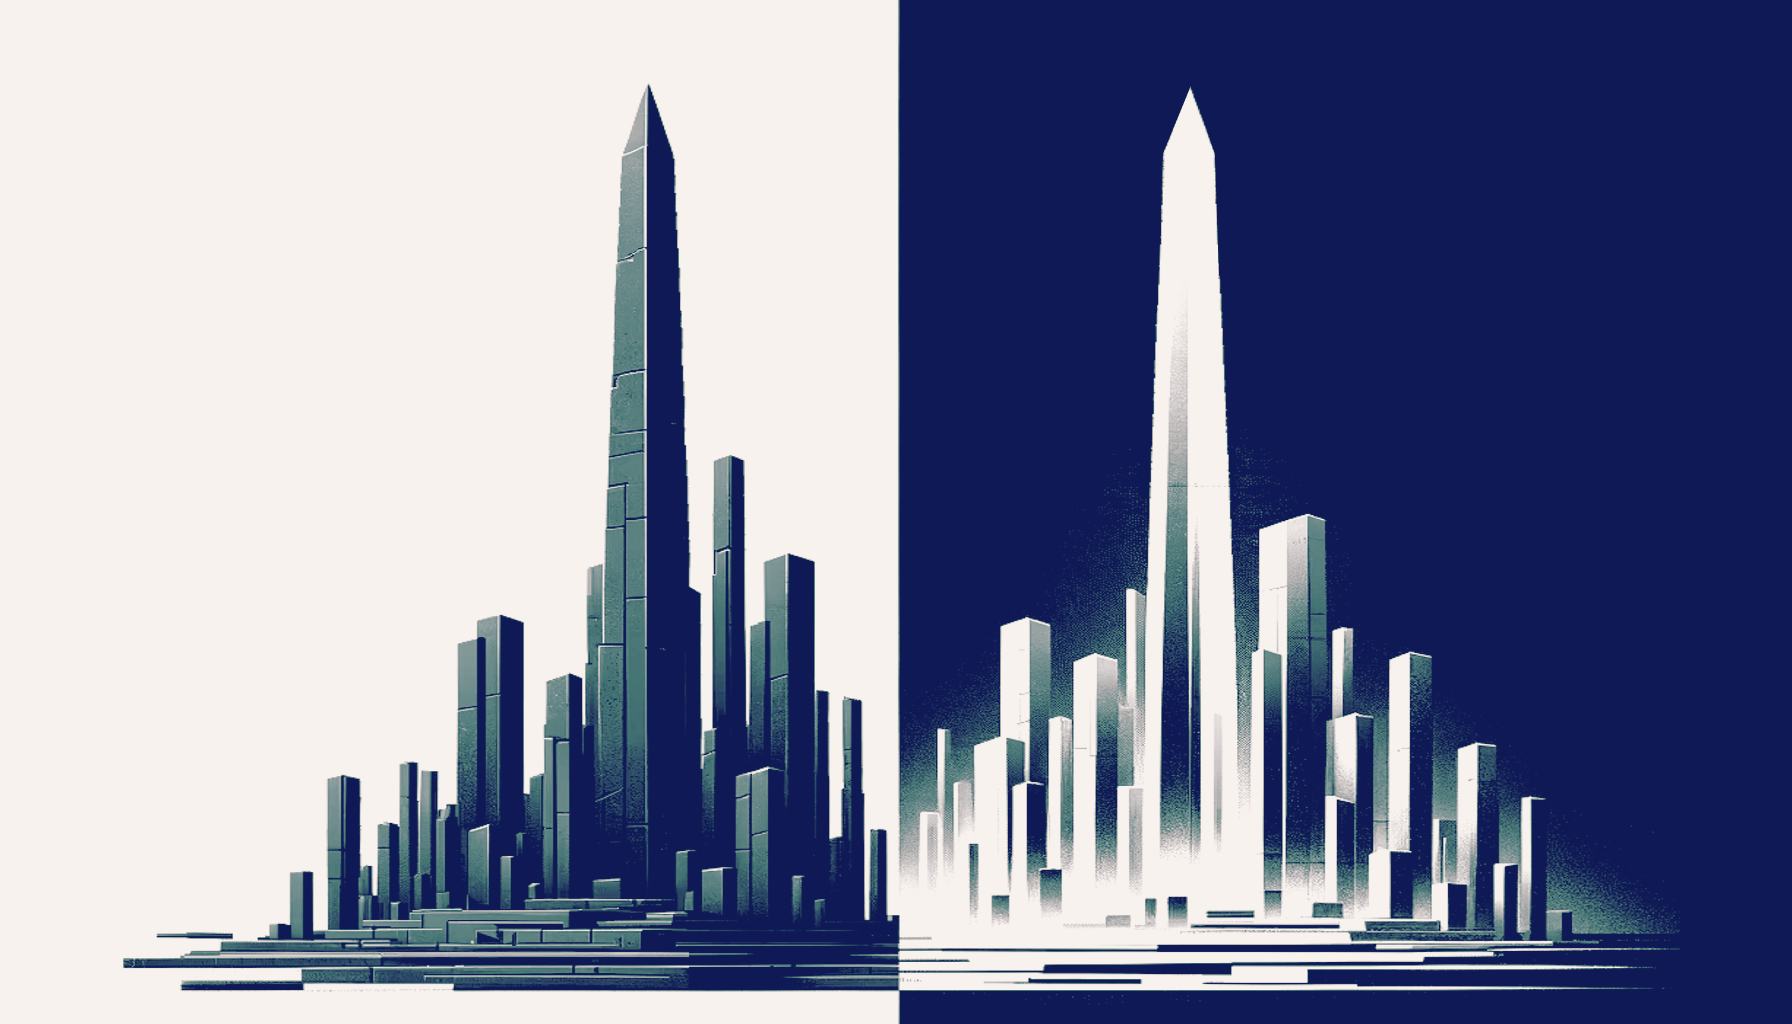 An abstract representation of the Turing test. On the left is a dark city of obelisks over a bright background, and on the right is the same thing, mirrored and inverted, but with subtle differences due to the randomness of the art generator. It represents the abstract idea of the Turing test: duality, subtle differences, same contours, and complex object made of simple parts. High contrast, monochromatic, minimalistic, in the style of vector svg art.